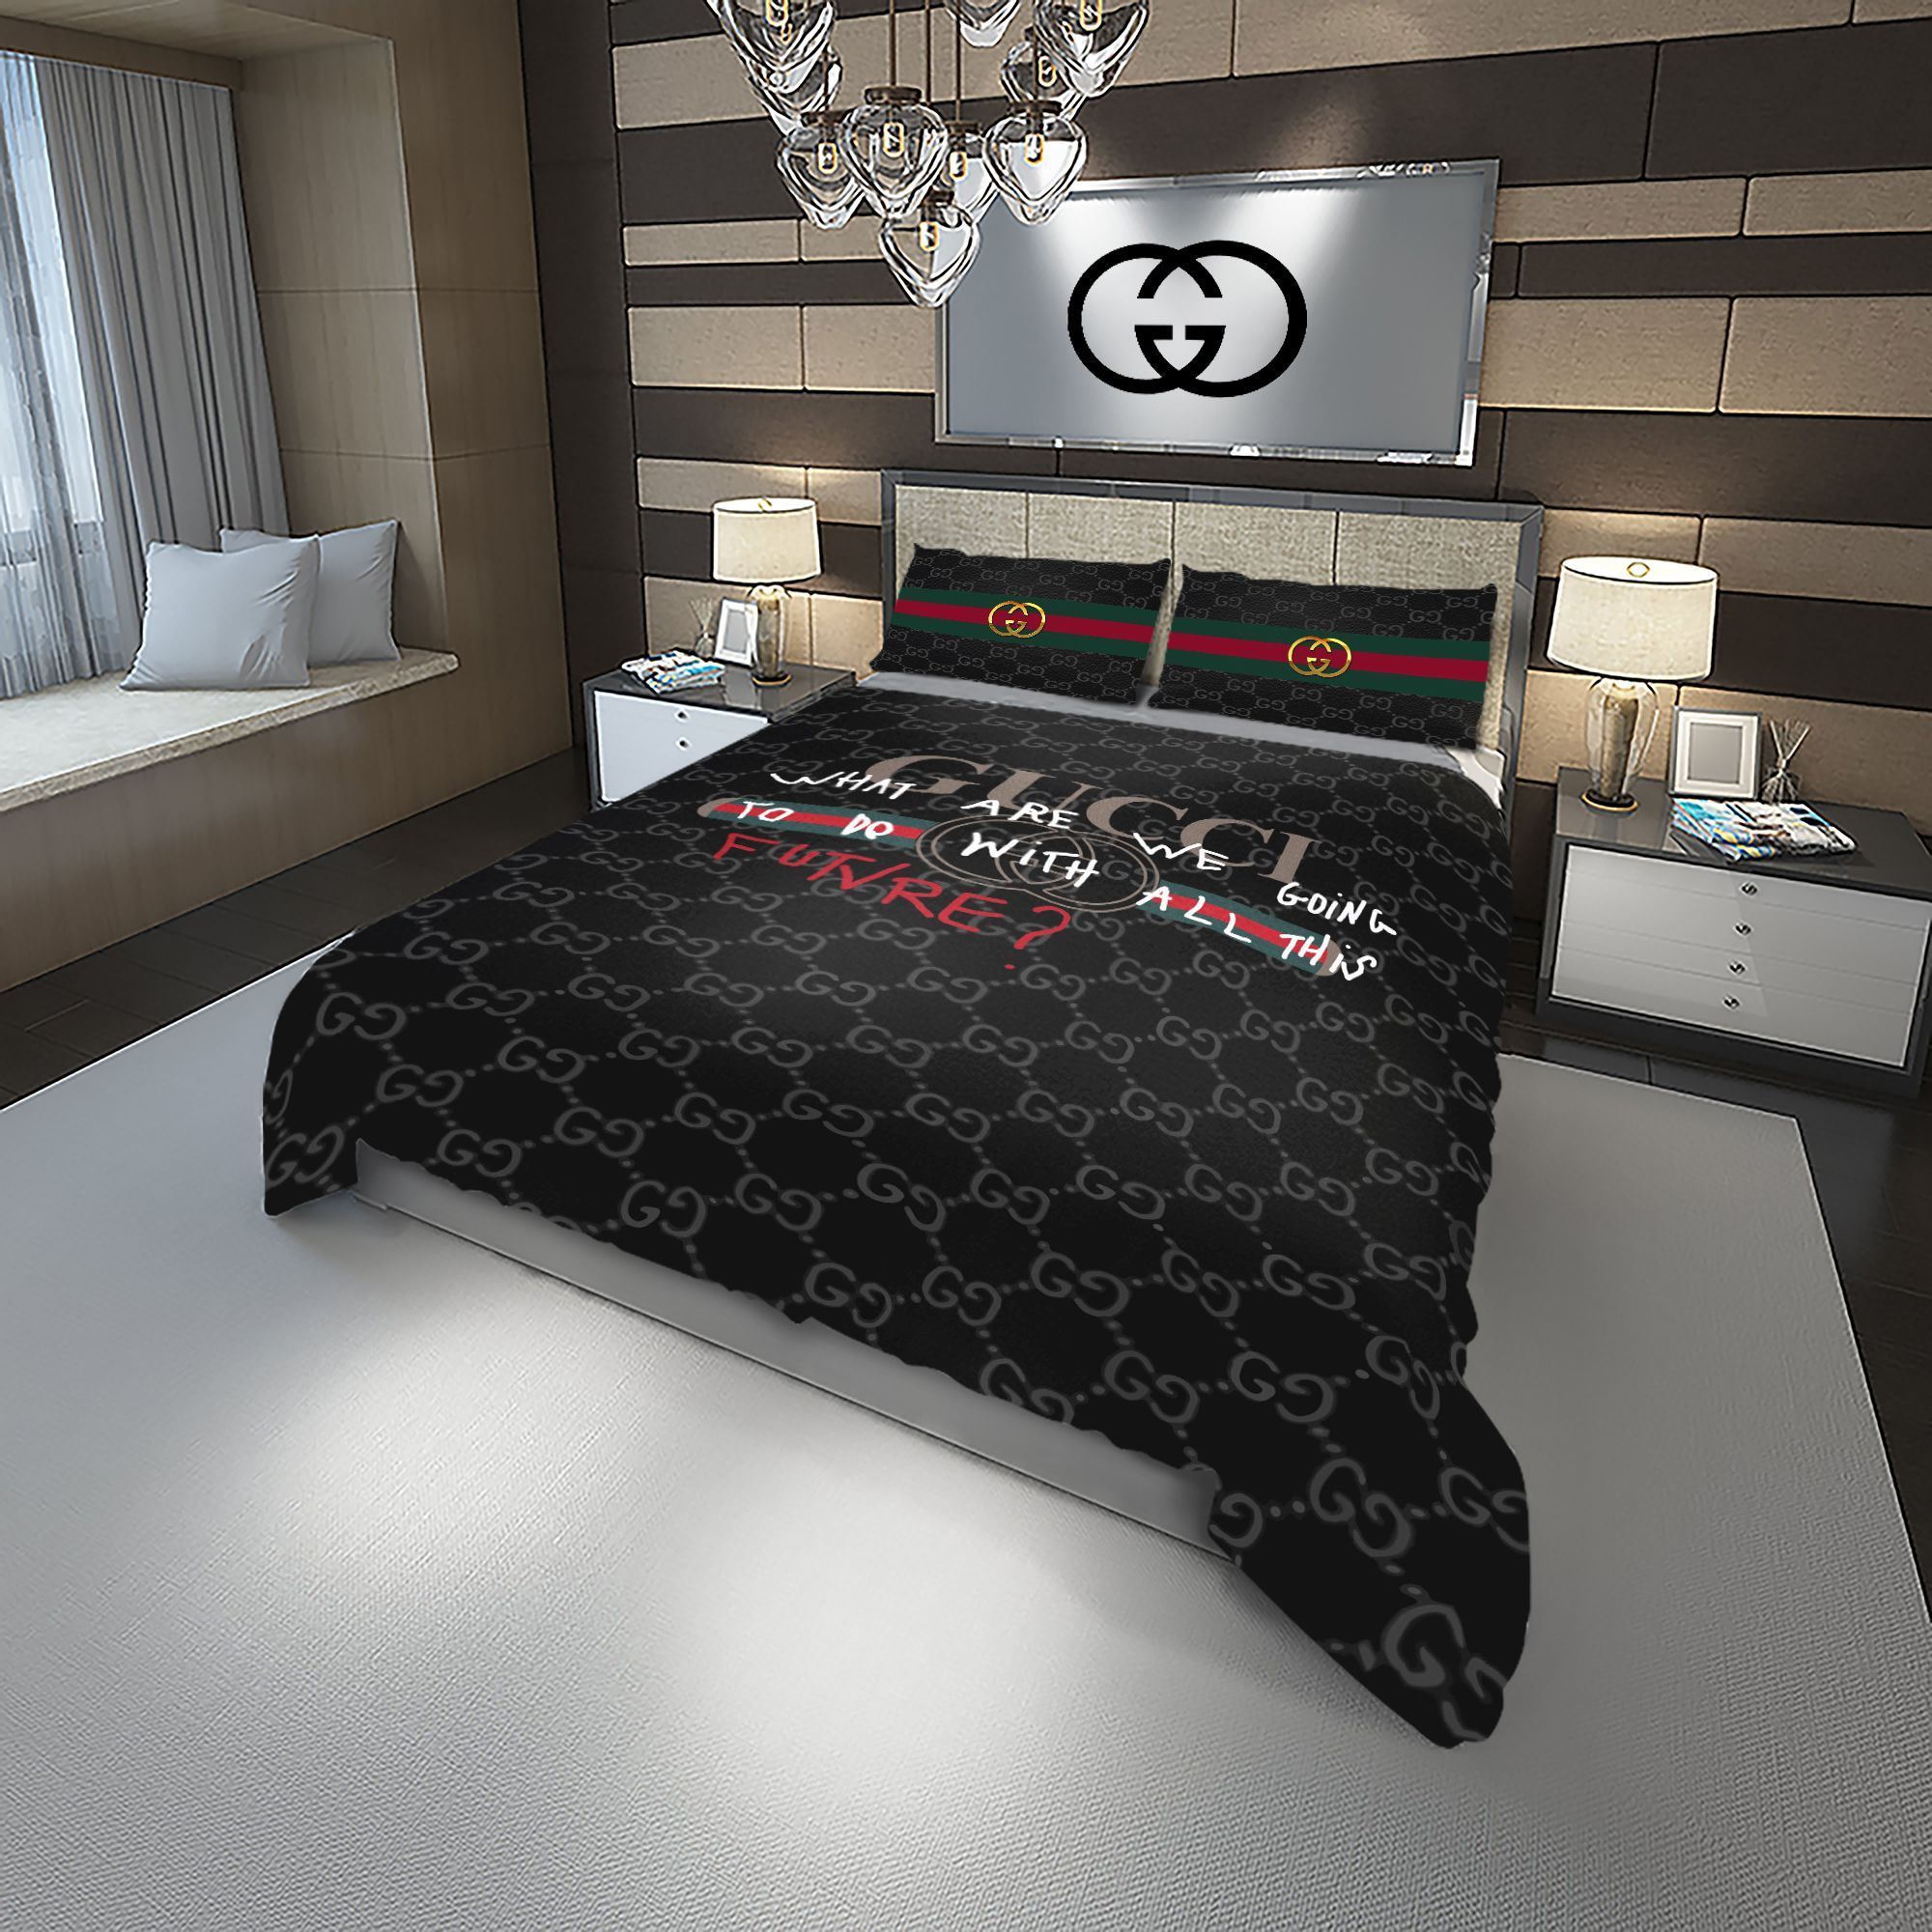 Let me show you about some luxury brand bedding set 2022 53